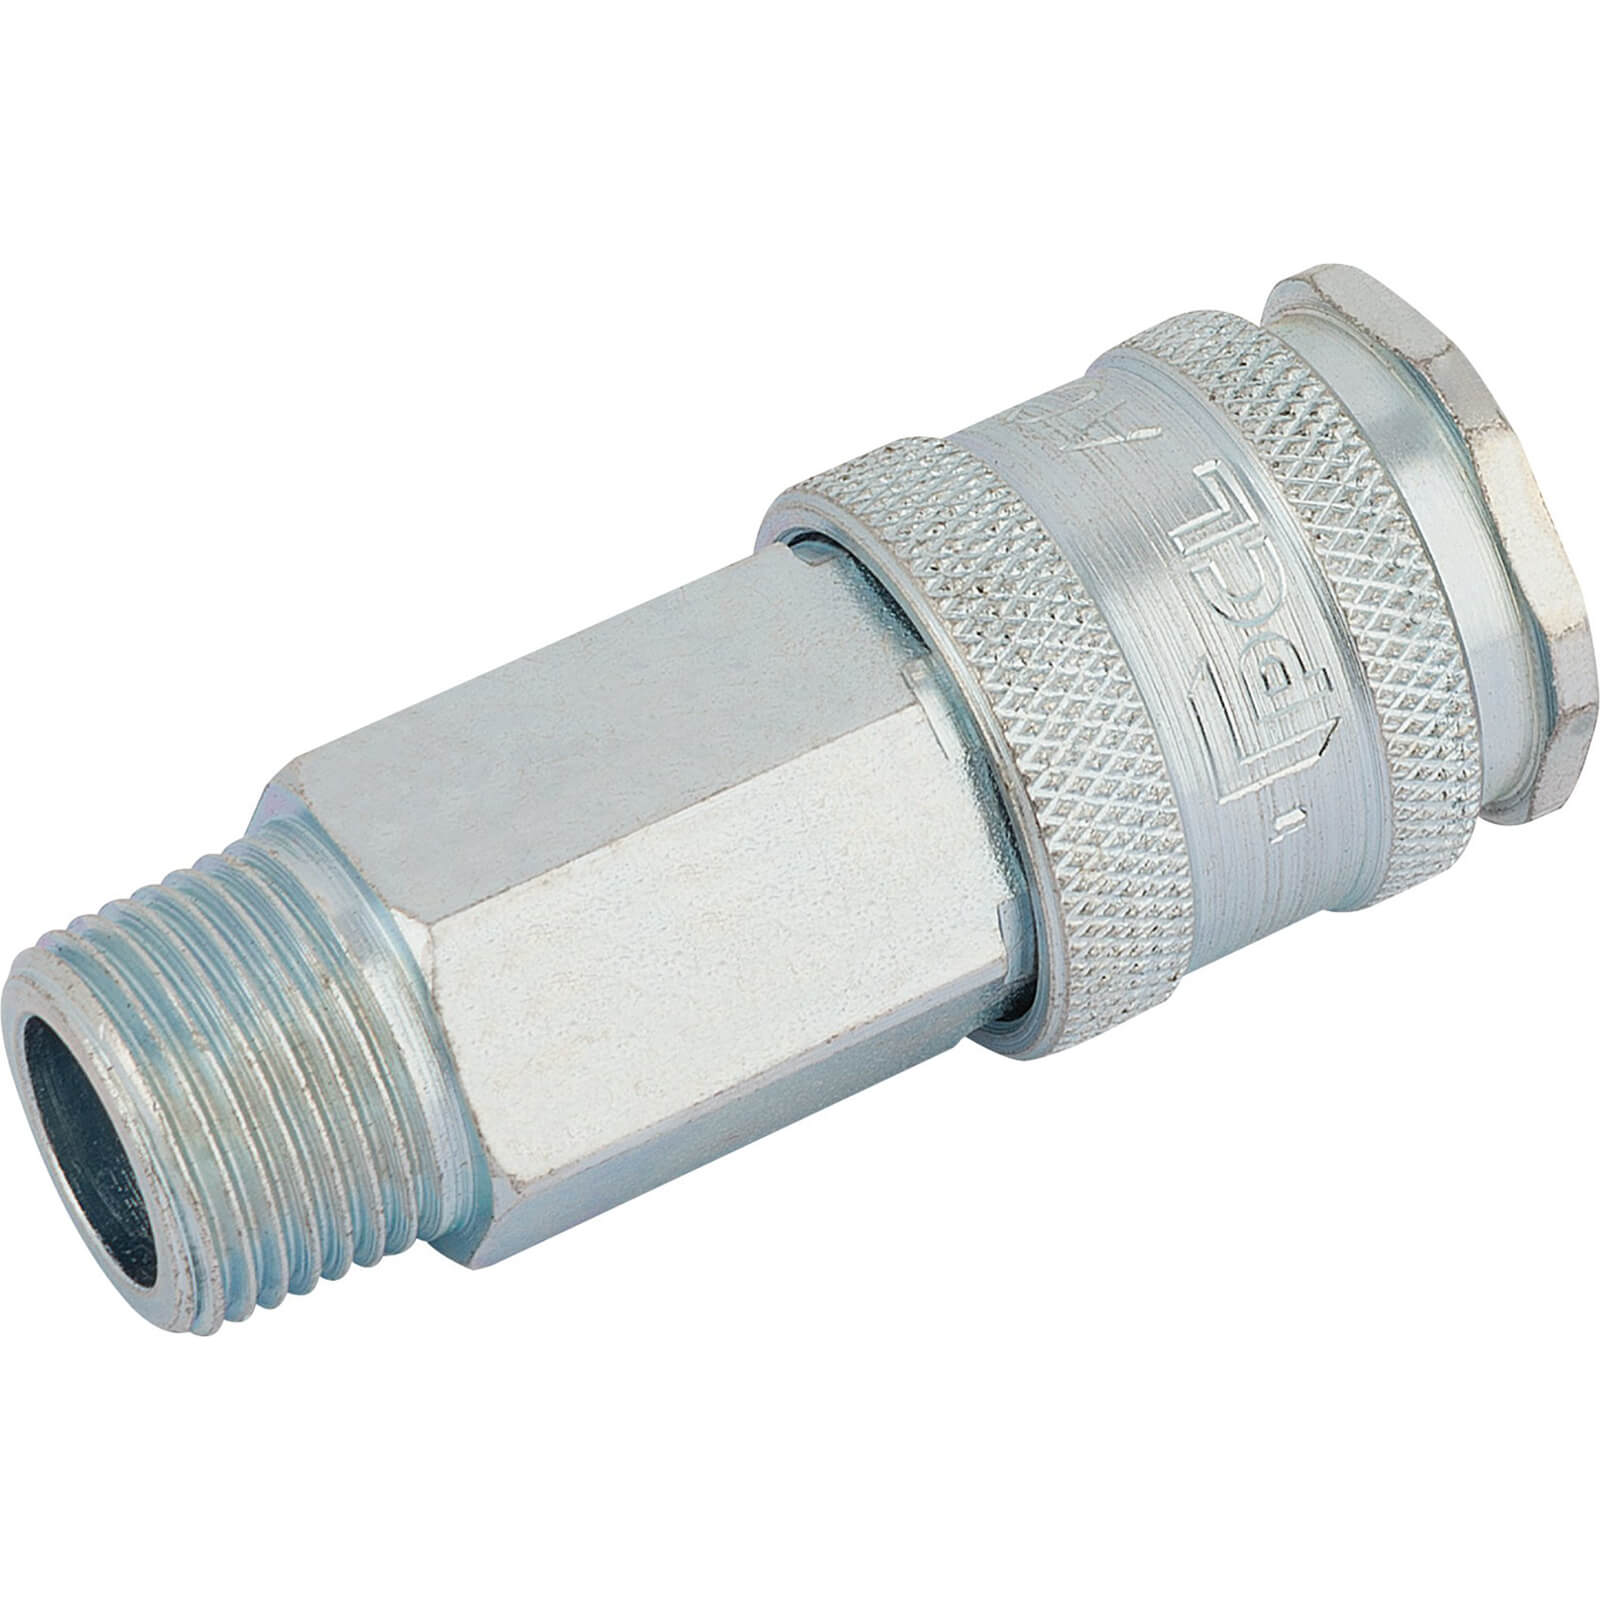 Image of Draper Euro Air Coupling Male Thread 3/8" BSP Pack of 1